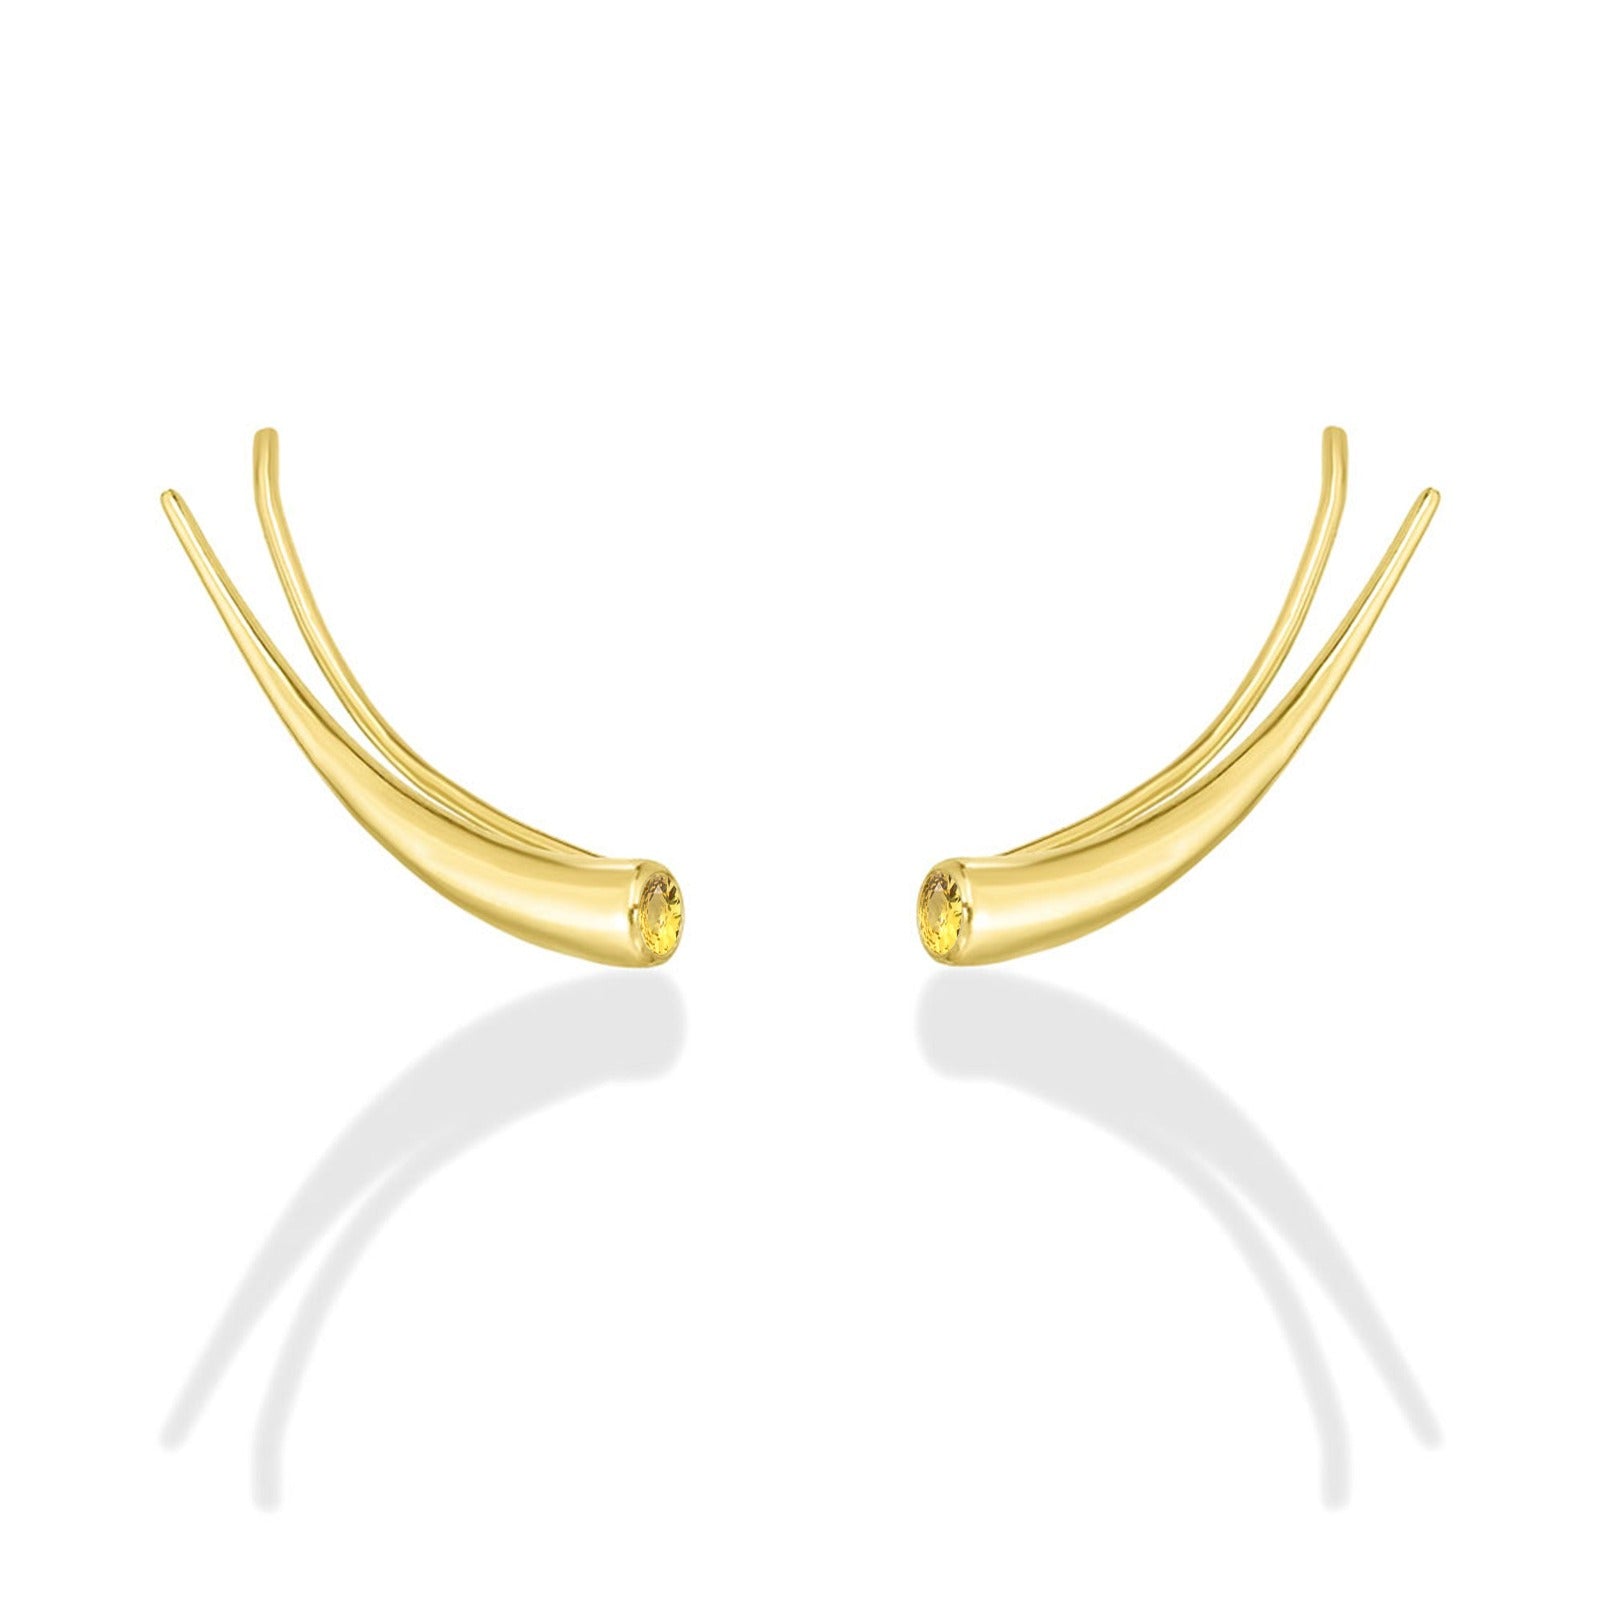 14k gold Curved Quill Climber Earrings with yellow topaz